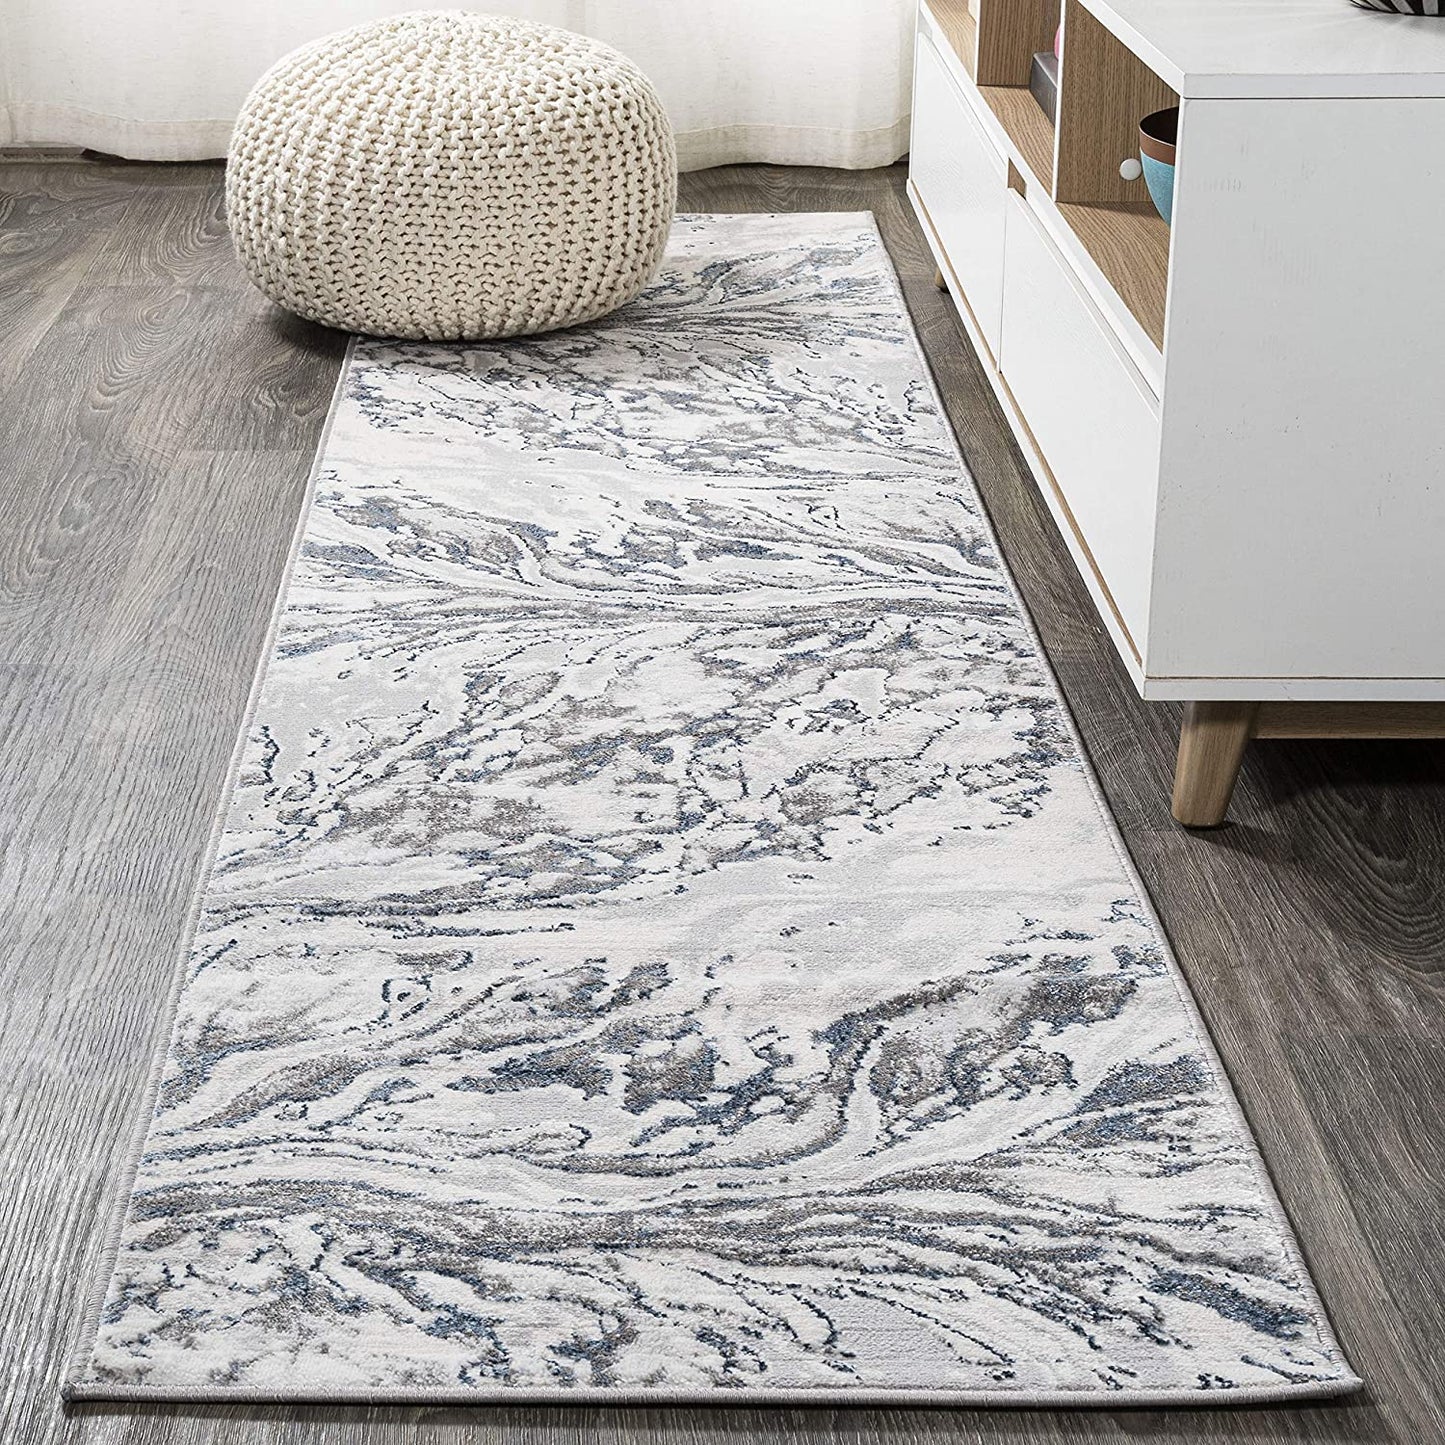 Swirl Marbled Abstract Gray/Blue Soft Area Rug